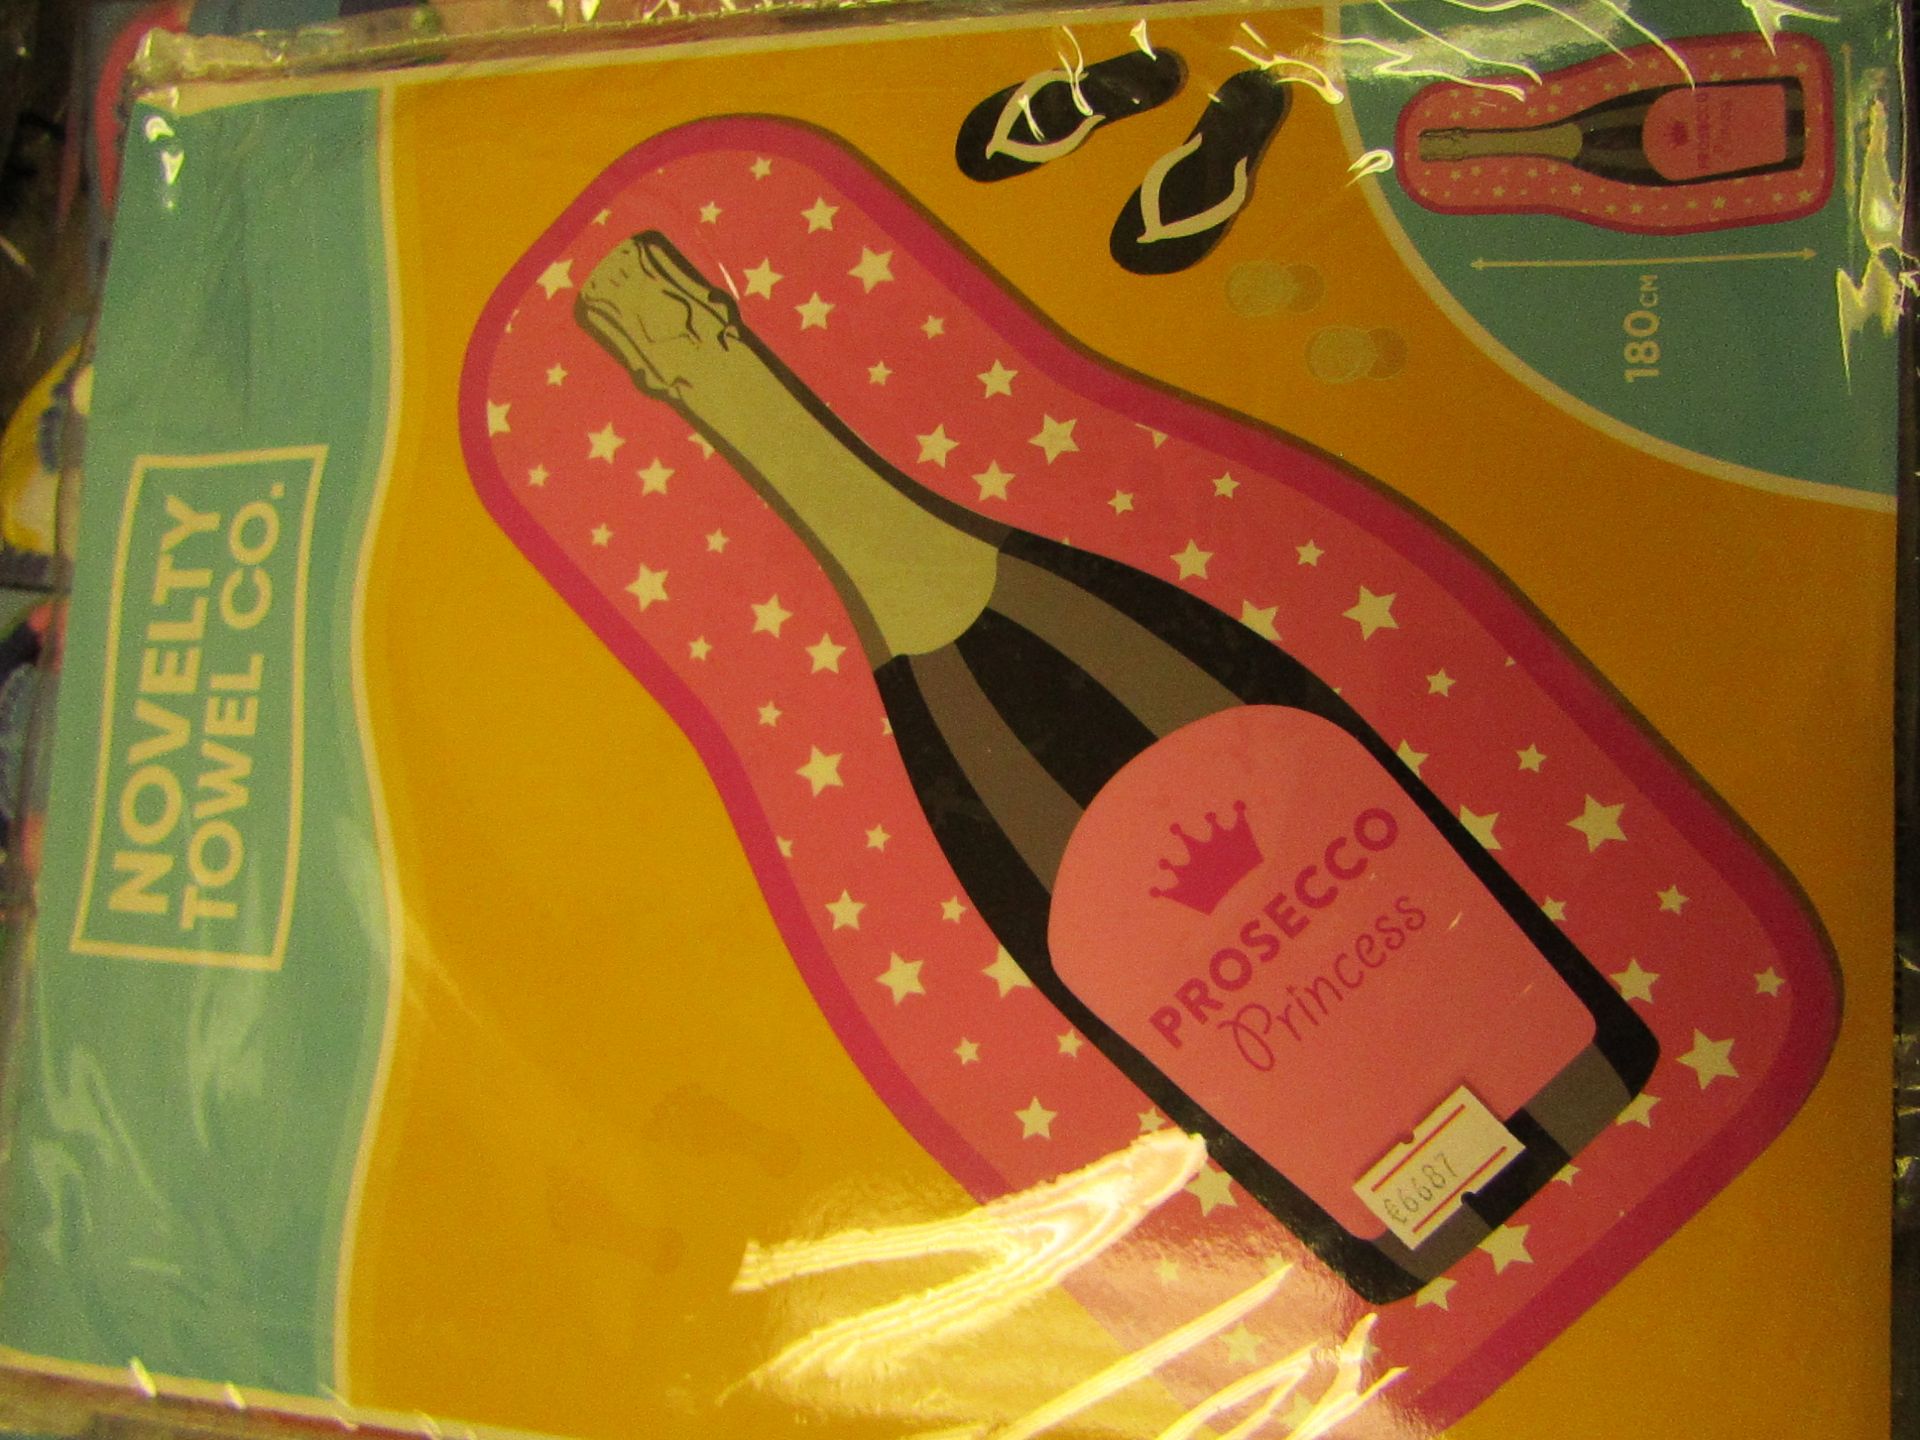 1 x Novelty Towel Co. Prosecco Princes Towel 91cm by 180cm new & packaged